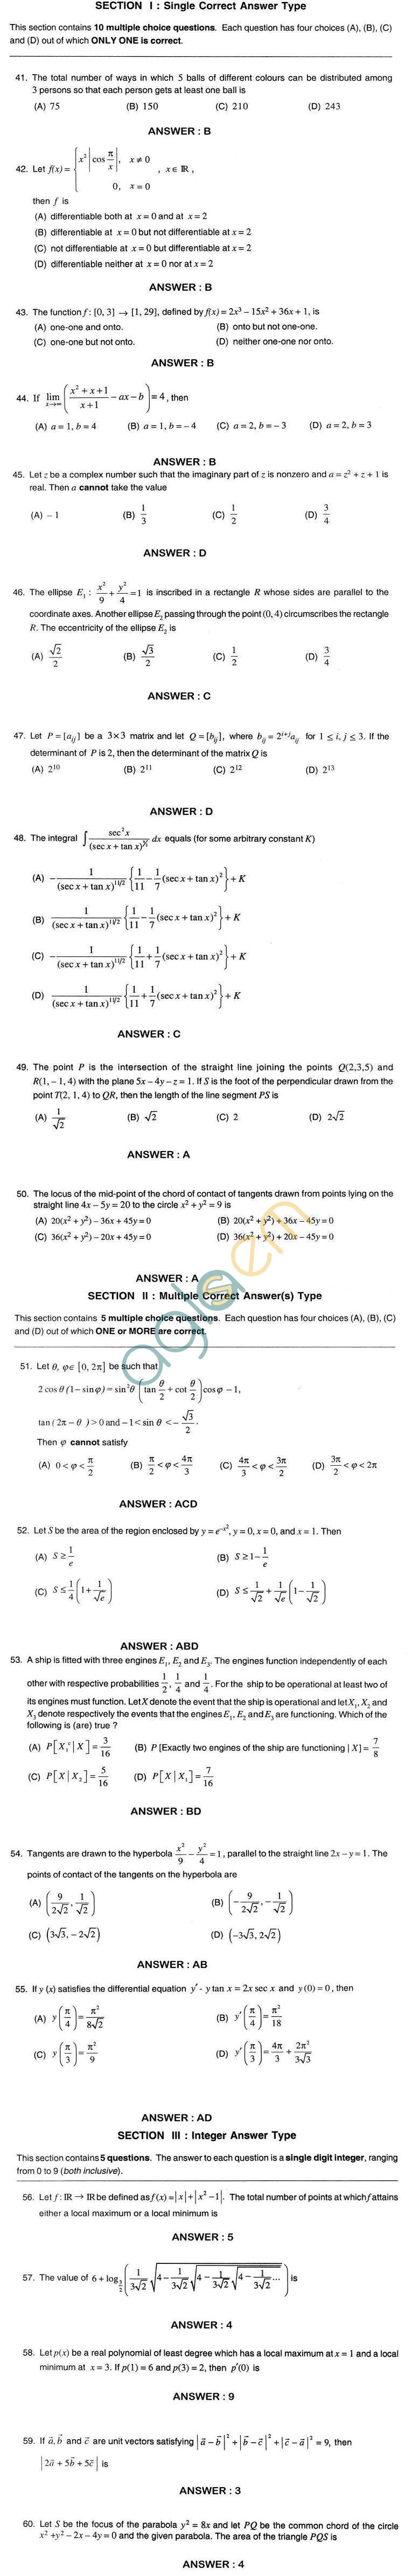 JEE Advanced 2017 Maths Practice Papers